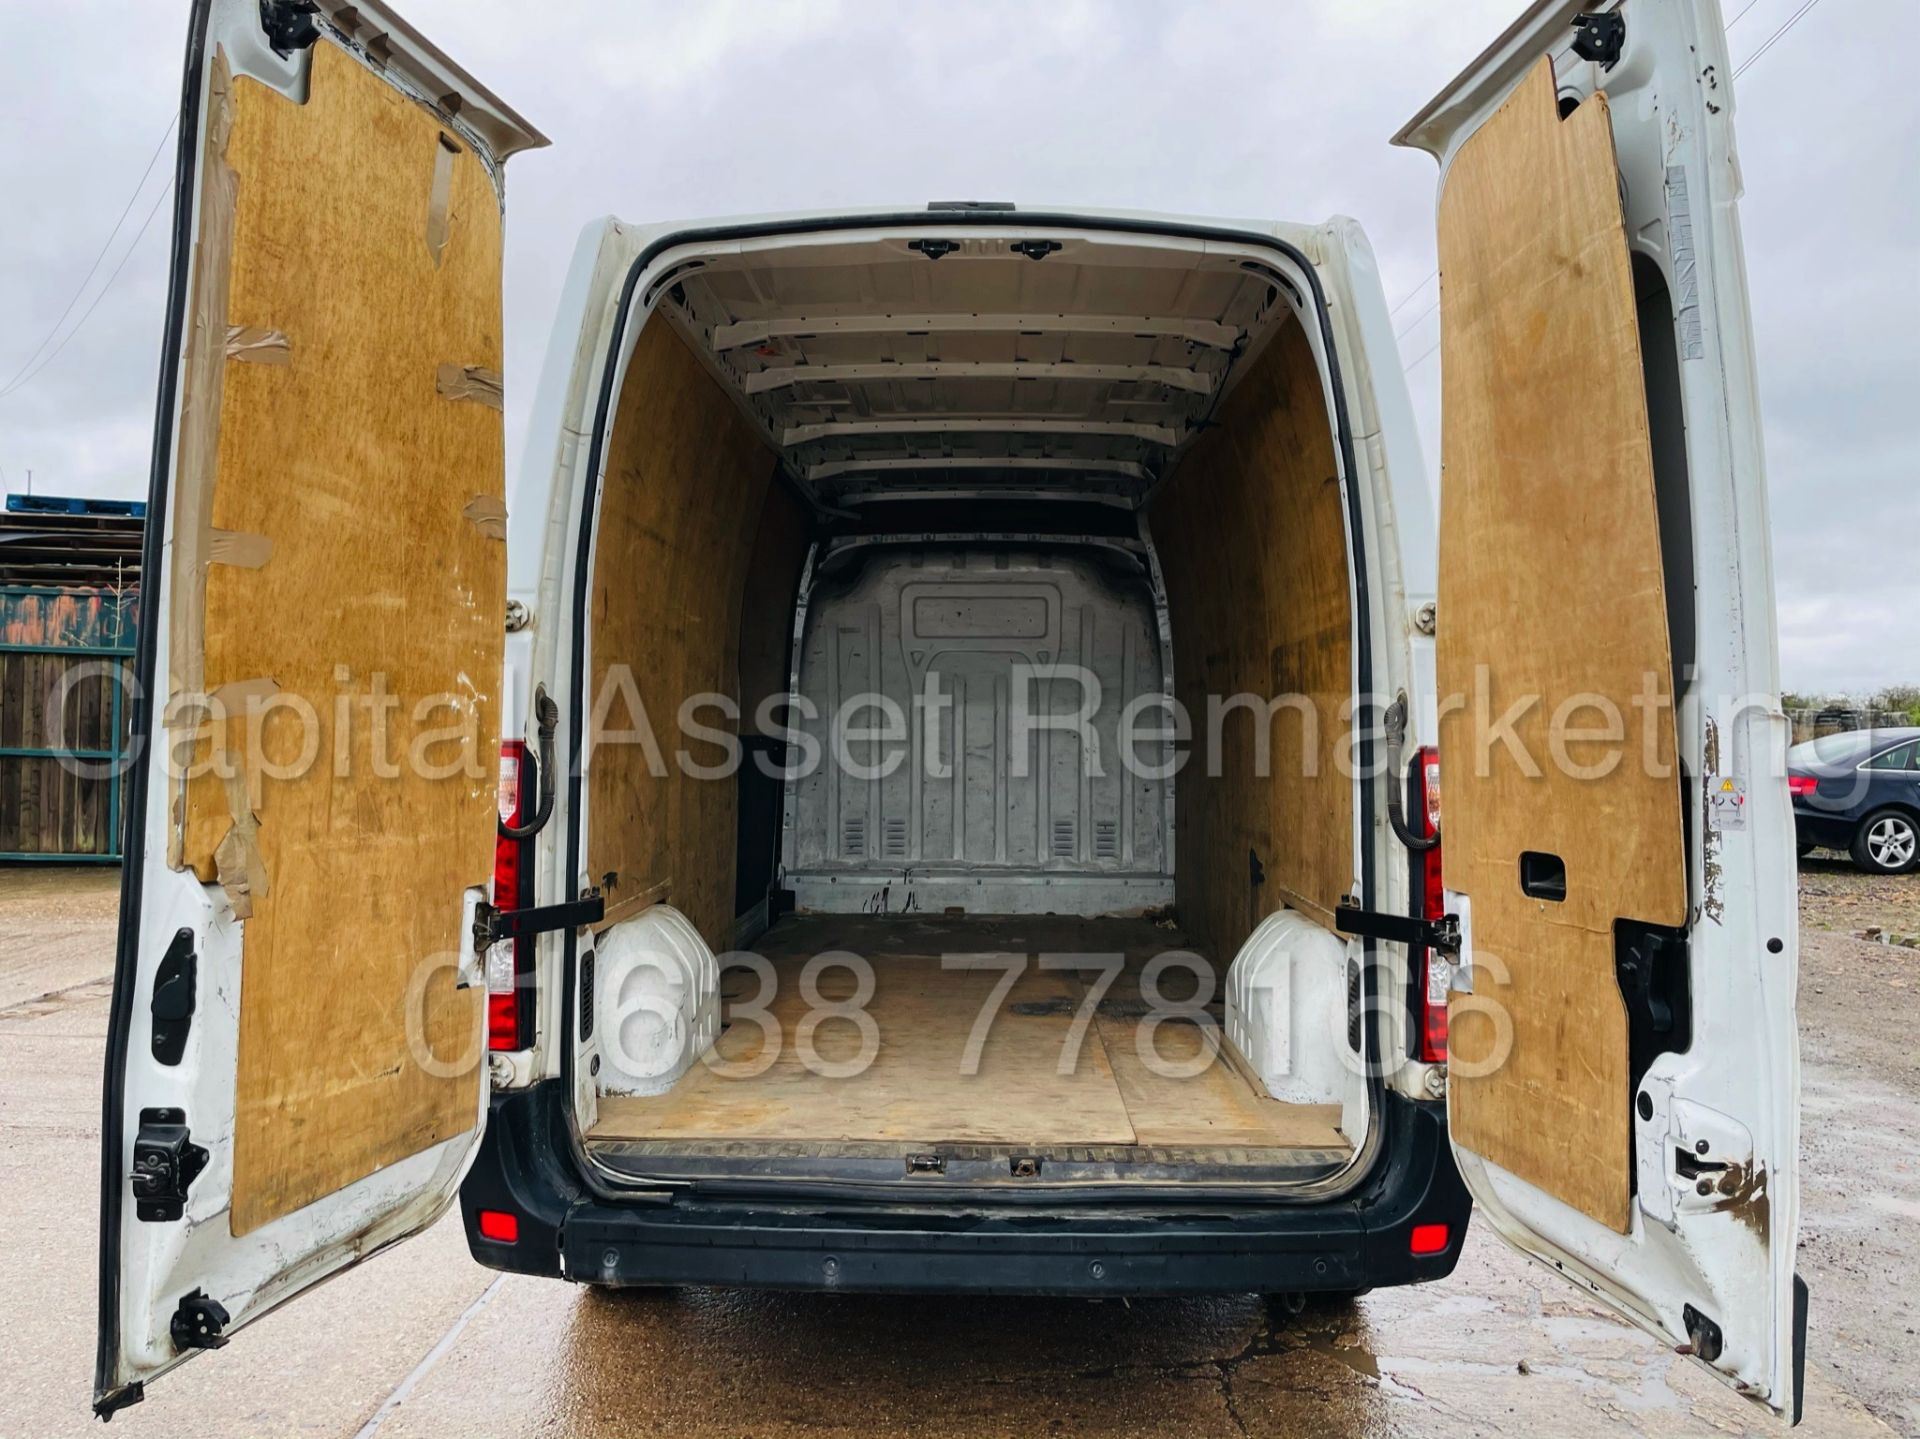 (On Sale) VAUXHALL MOVANO *LWB HI-ROOF* (2014) '2.3 CDTI-125 BHP- 6 SPEED' *1 OWNER* (3500 KG) *A/C* - Image 14 of 29